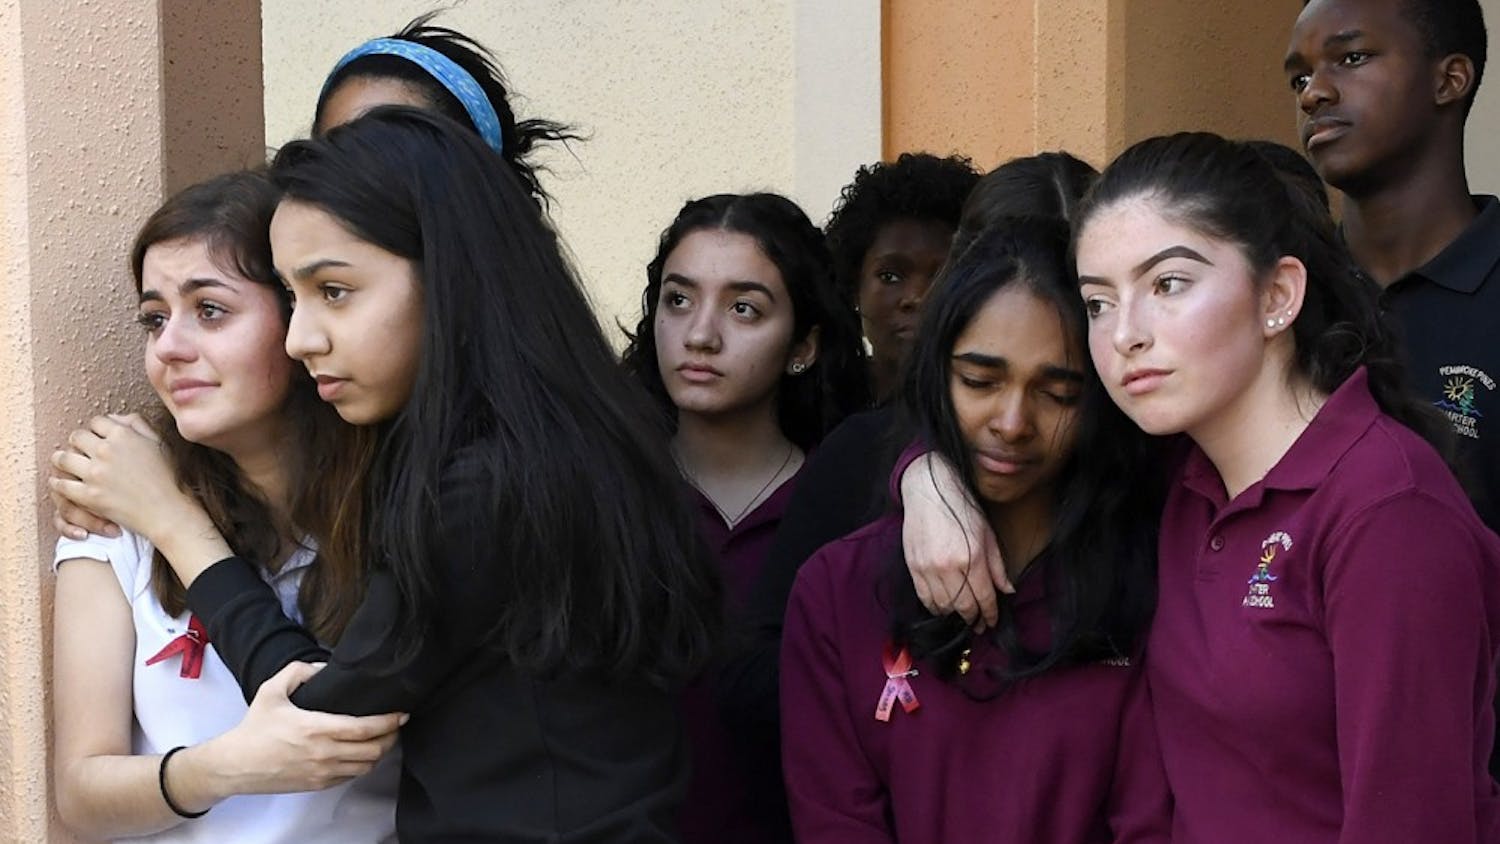 Pembroke Pines Charter High School students, from left, Brianna Adan, Naveen Farook, Swati Cumar, Sofia Mendoza and others listen to the names of the 17 killed during the mass shooting at Marjory Stoneman Douglas High School a week ago during the school&apos;s walkout Wednesday, Feb. 21, 2018, in Pembroke Pines, Fla. (Taimy Alvarez/Sun Sentinel/TNS) 